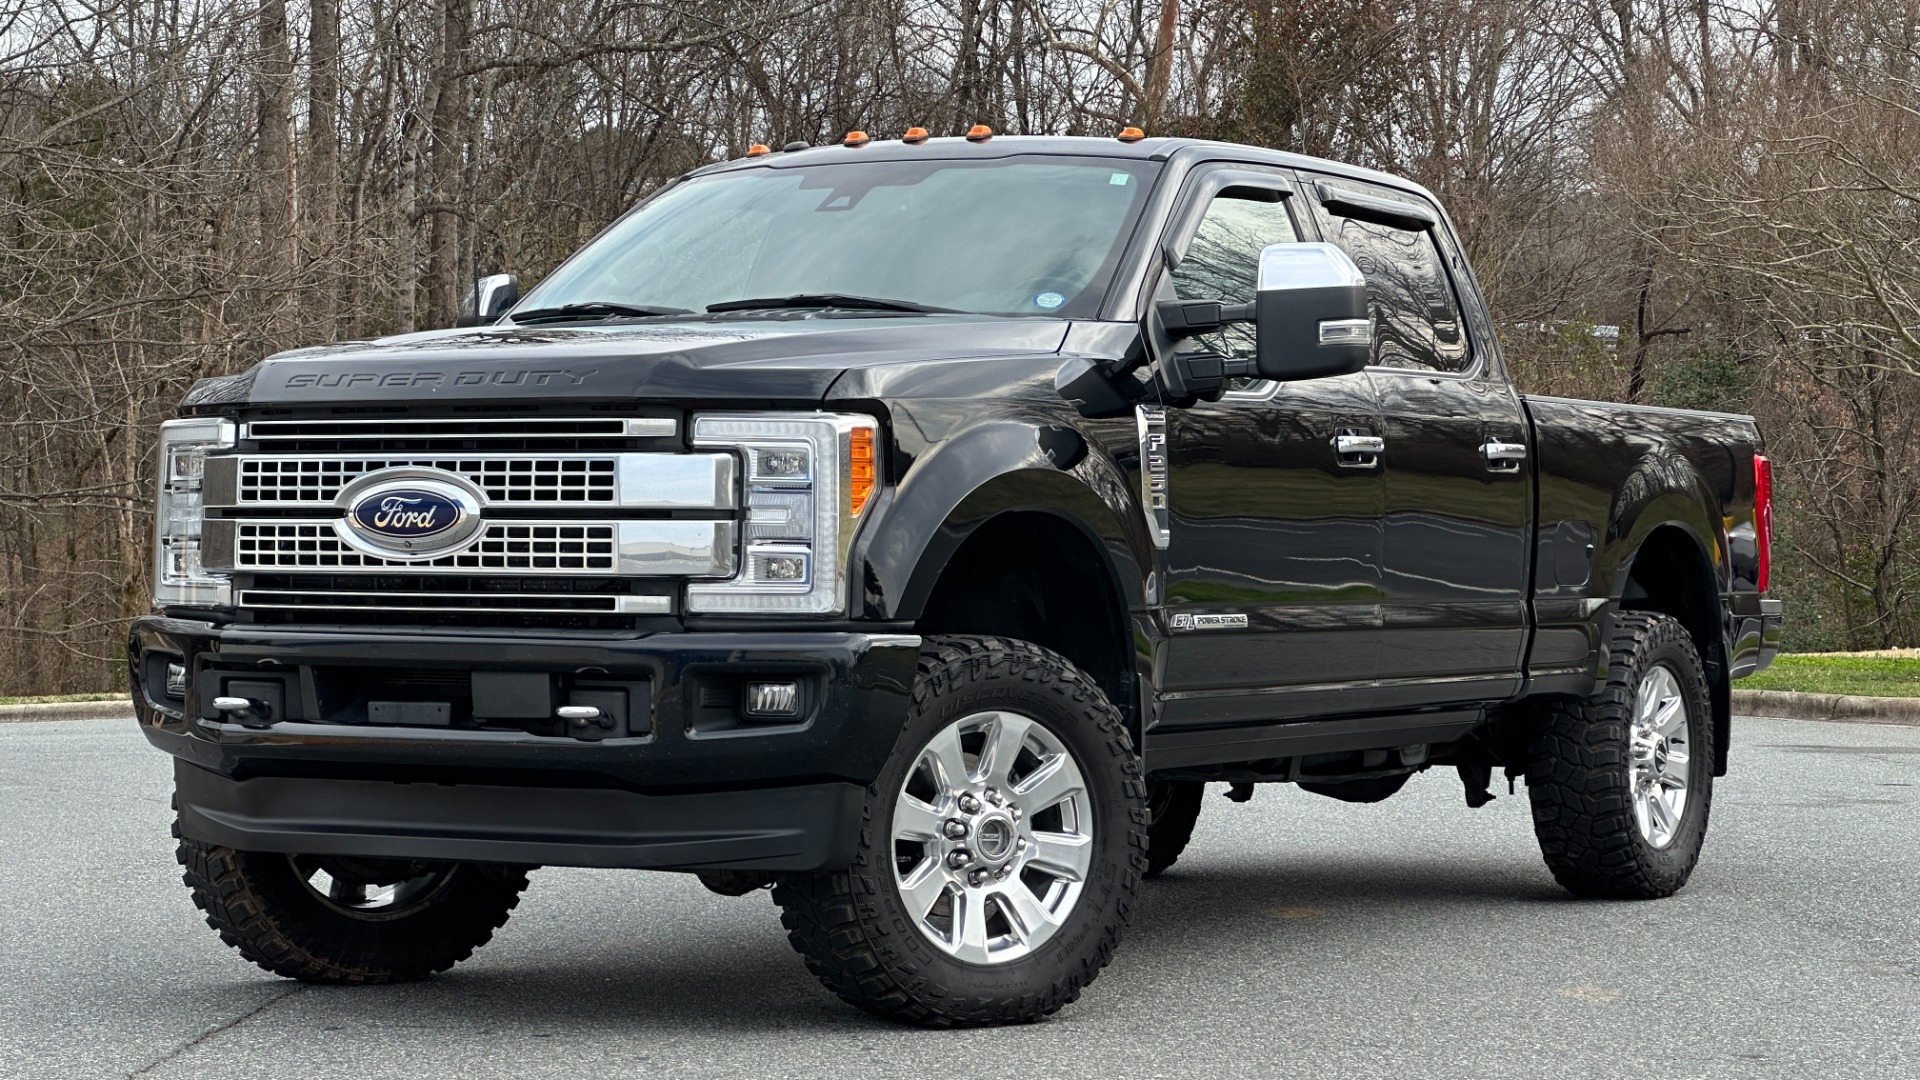 Used 2017 Ford Super Duty F-250 SRW PLATINUM / ULTIMATE PACKAGE / FX4 OFFROAD / 6.7L POWERSTROKE DIESEL for sale Sold at Formula Imports in Charlotte NC 28227 1